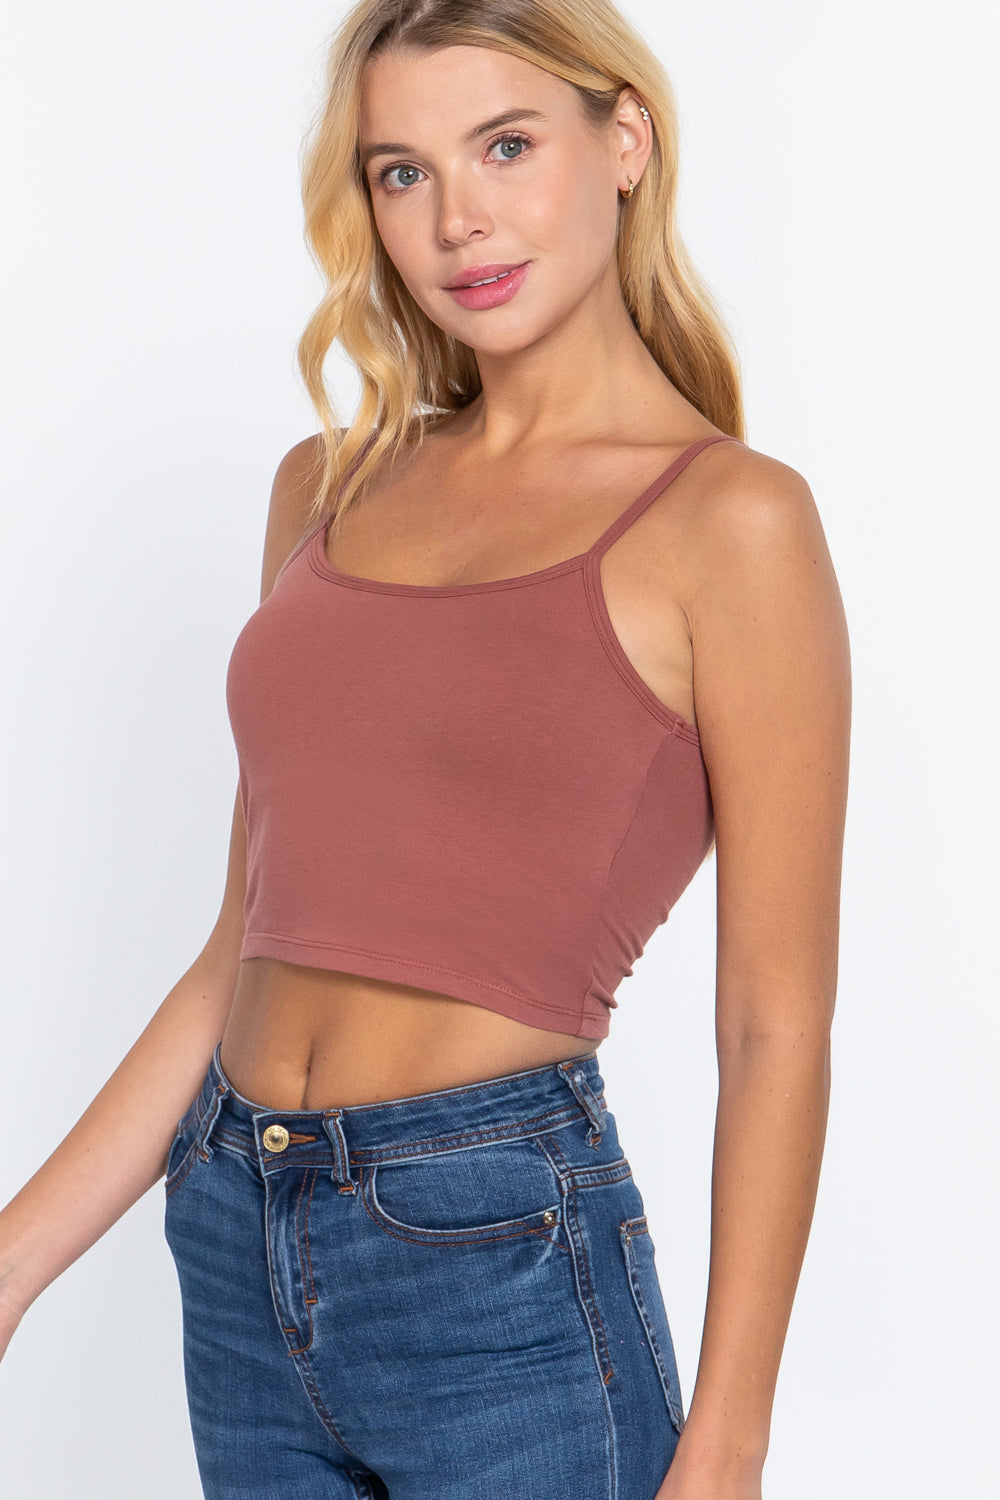 Round Neck with Removable Bra Cup Cotton Spandex Bra Top in Terracotta